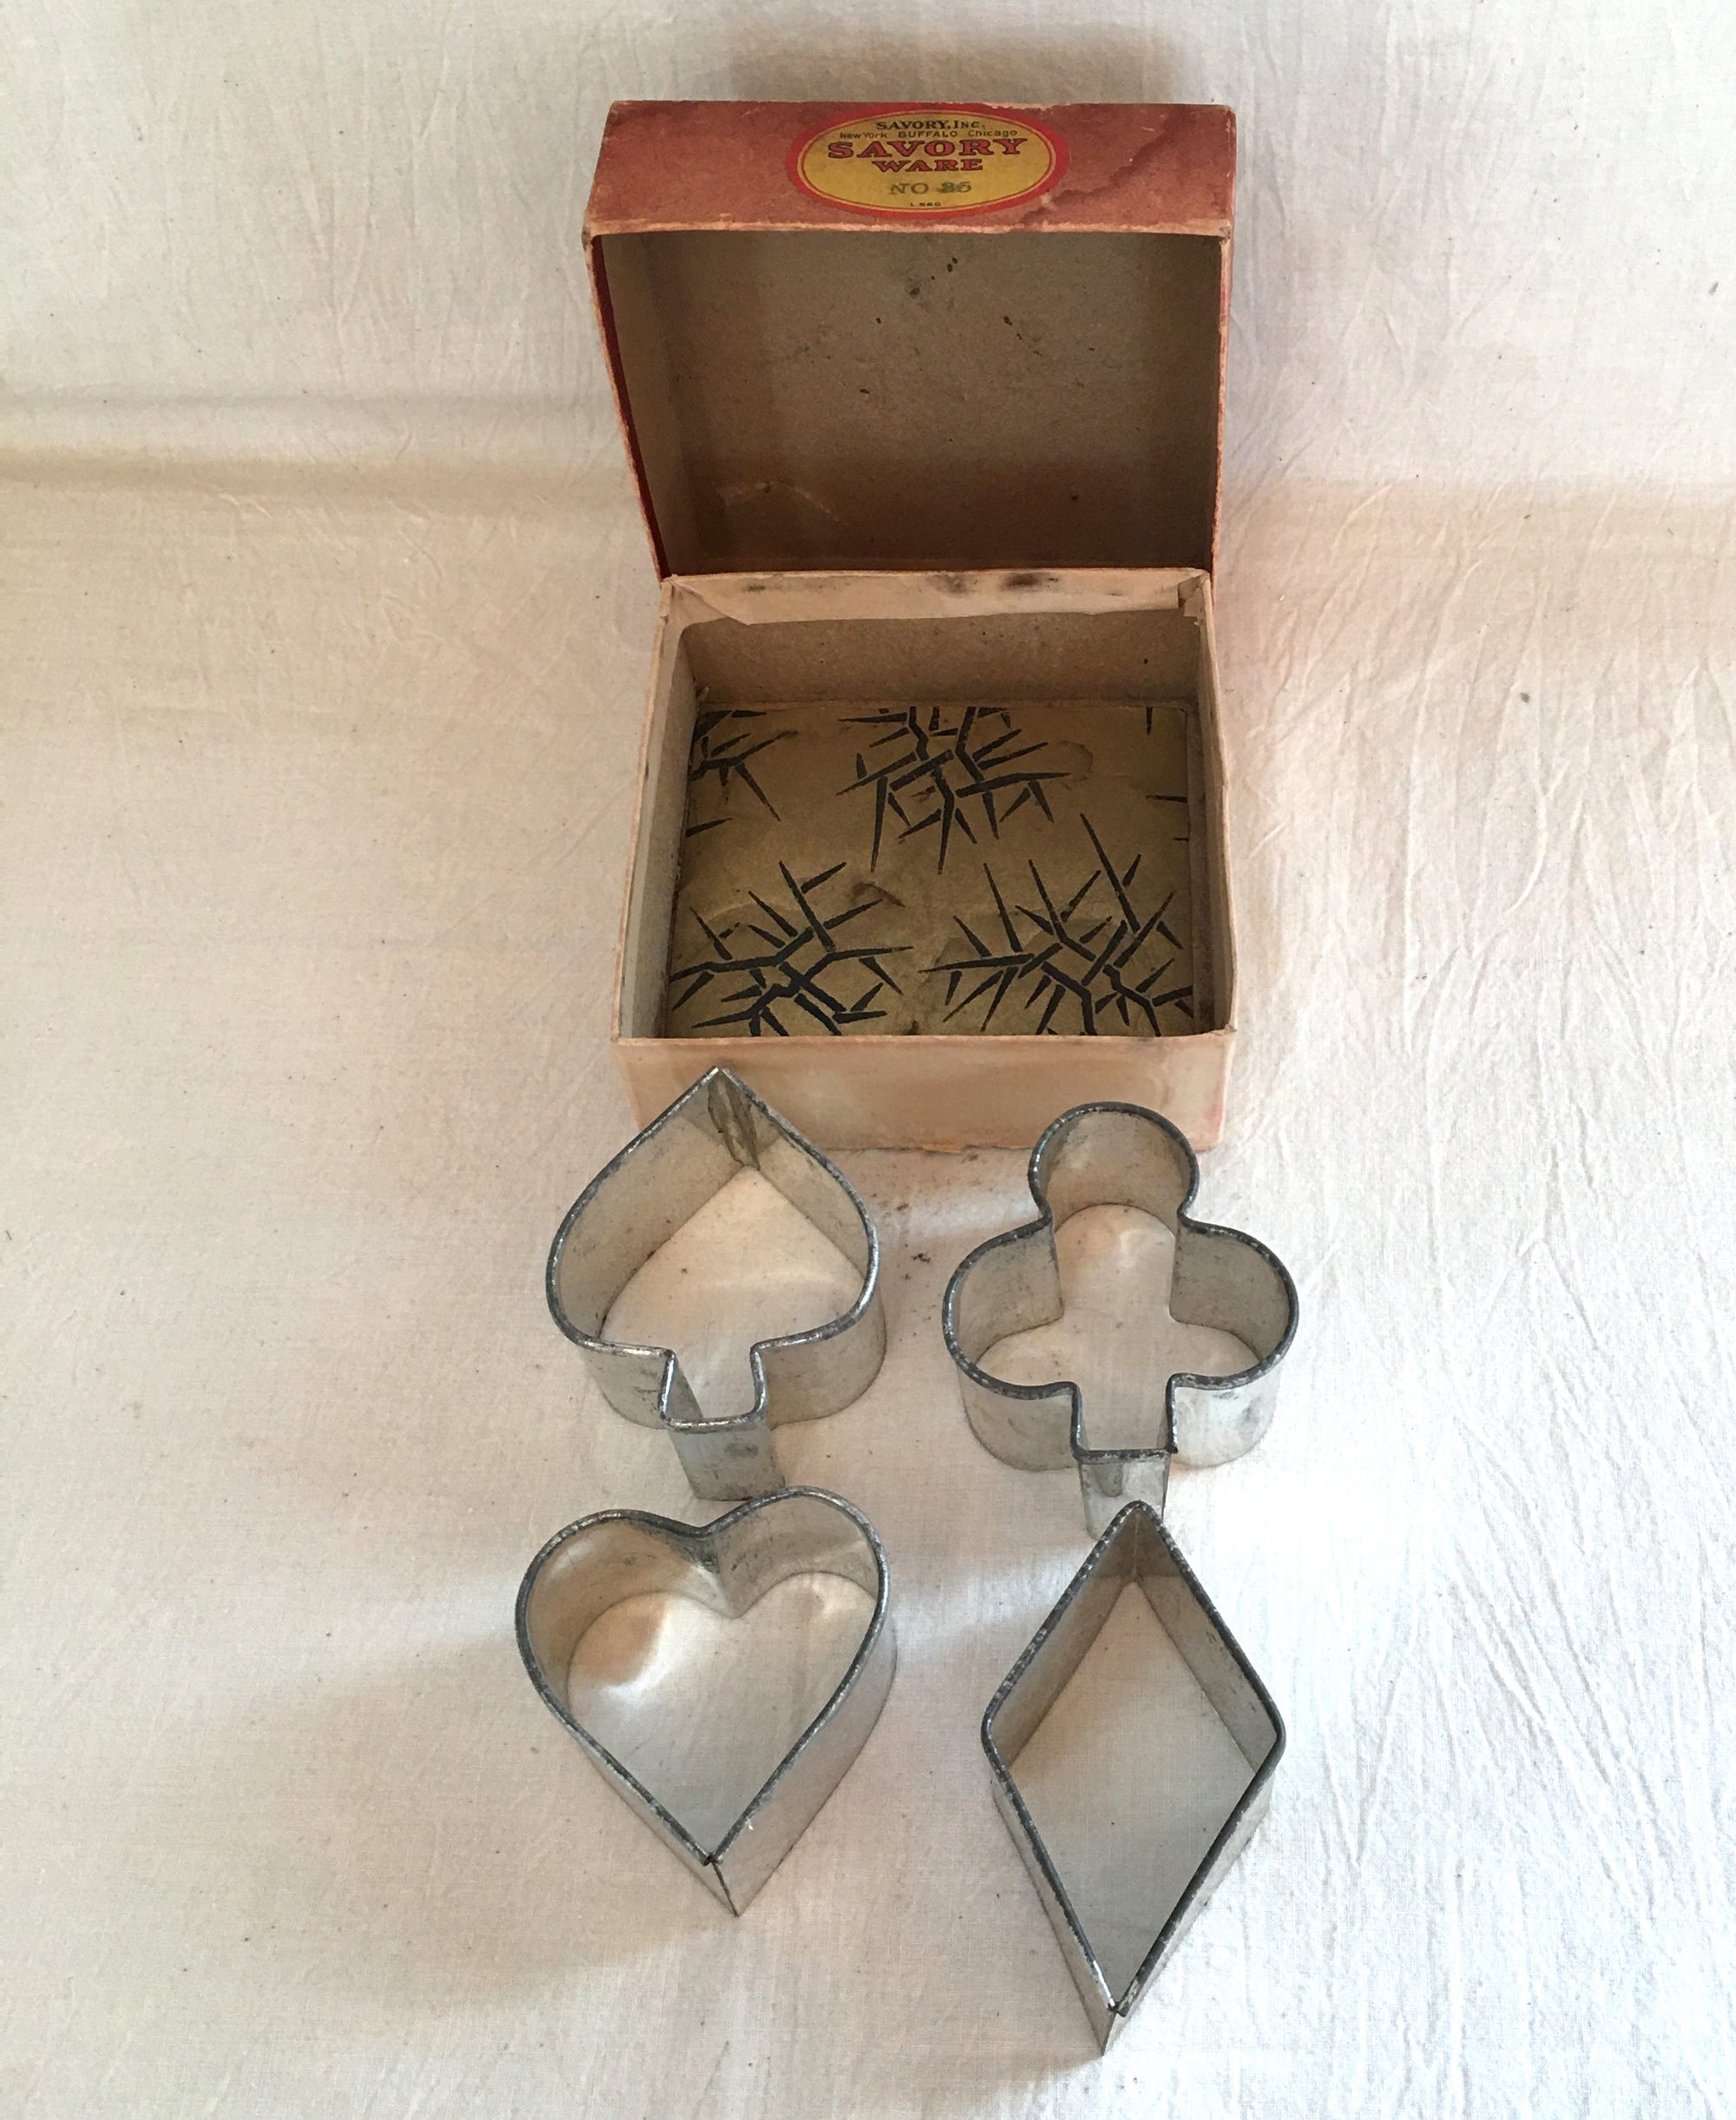 1920s to 1930s Savory Ware Cookie Cutters in Original Box, Shapes of Playing Card Suits